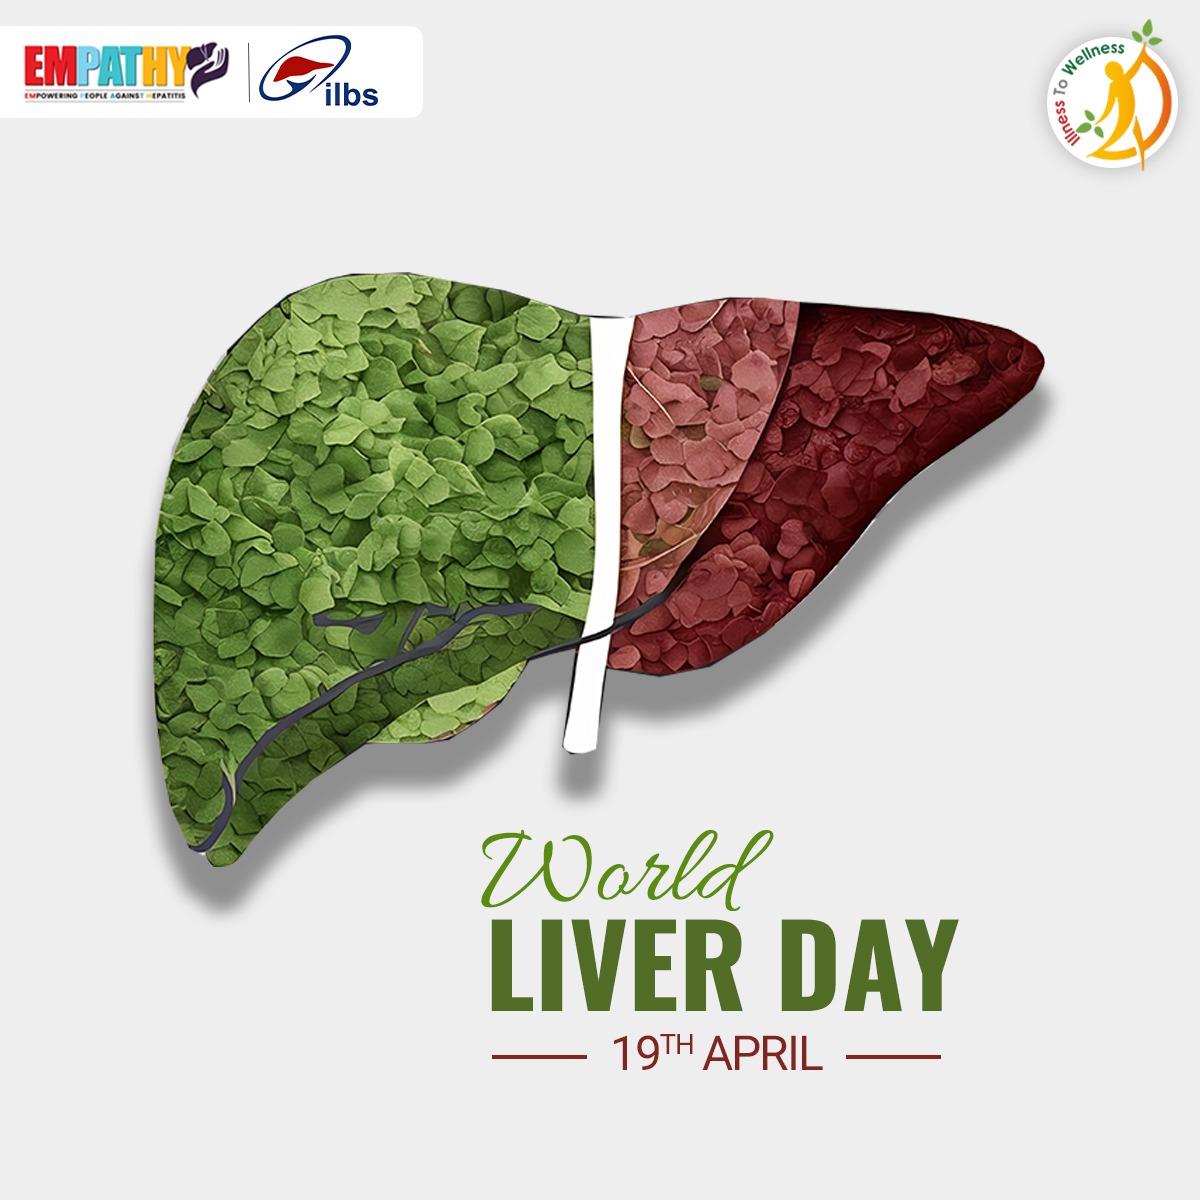 Liver: Your Body's MVP! 
Celebrating #WorldLiverDay with a Focus on Health and Strength.  #IllnessToWellness #ILBS #theempathycampaign #LiverHealth #liver 
.
@ILBS_India